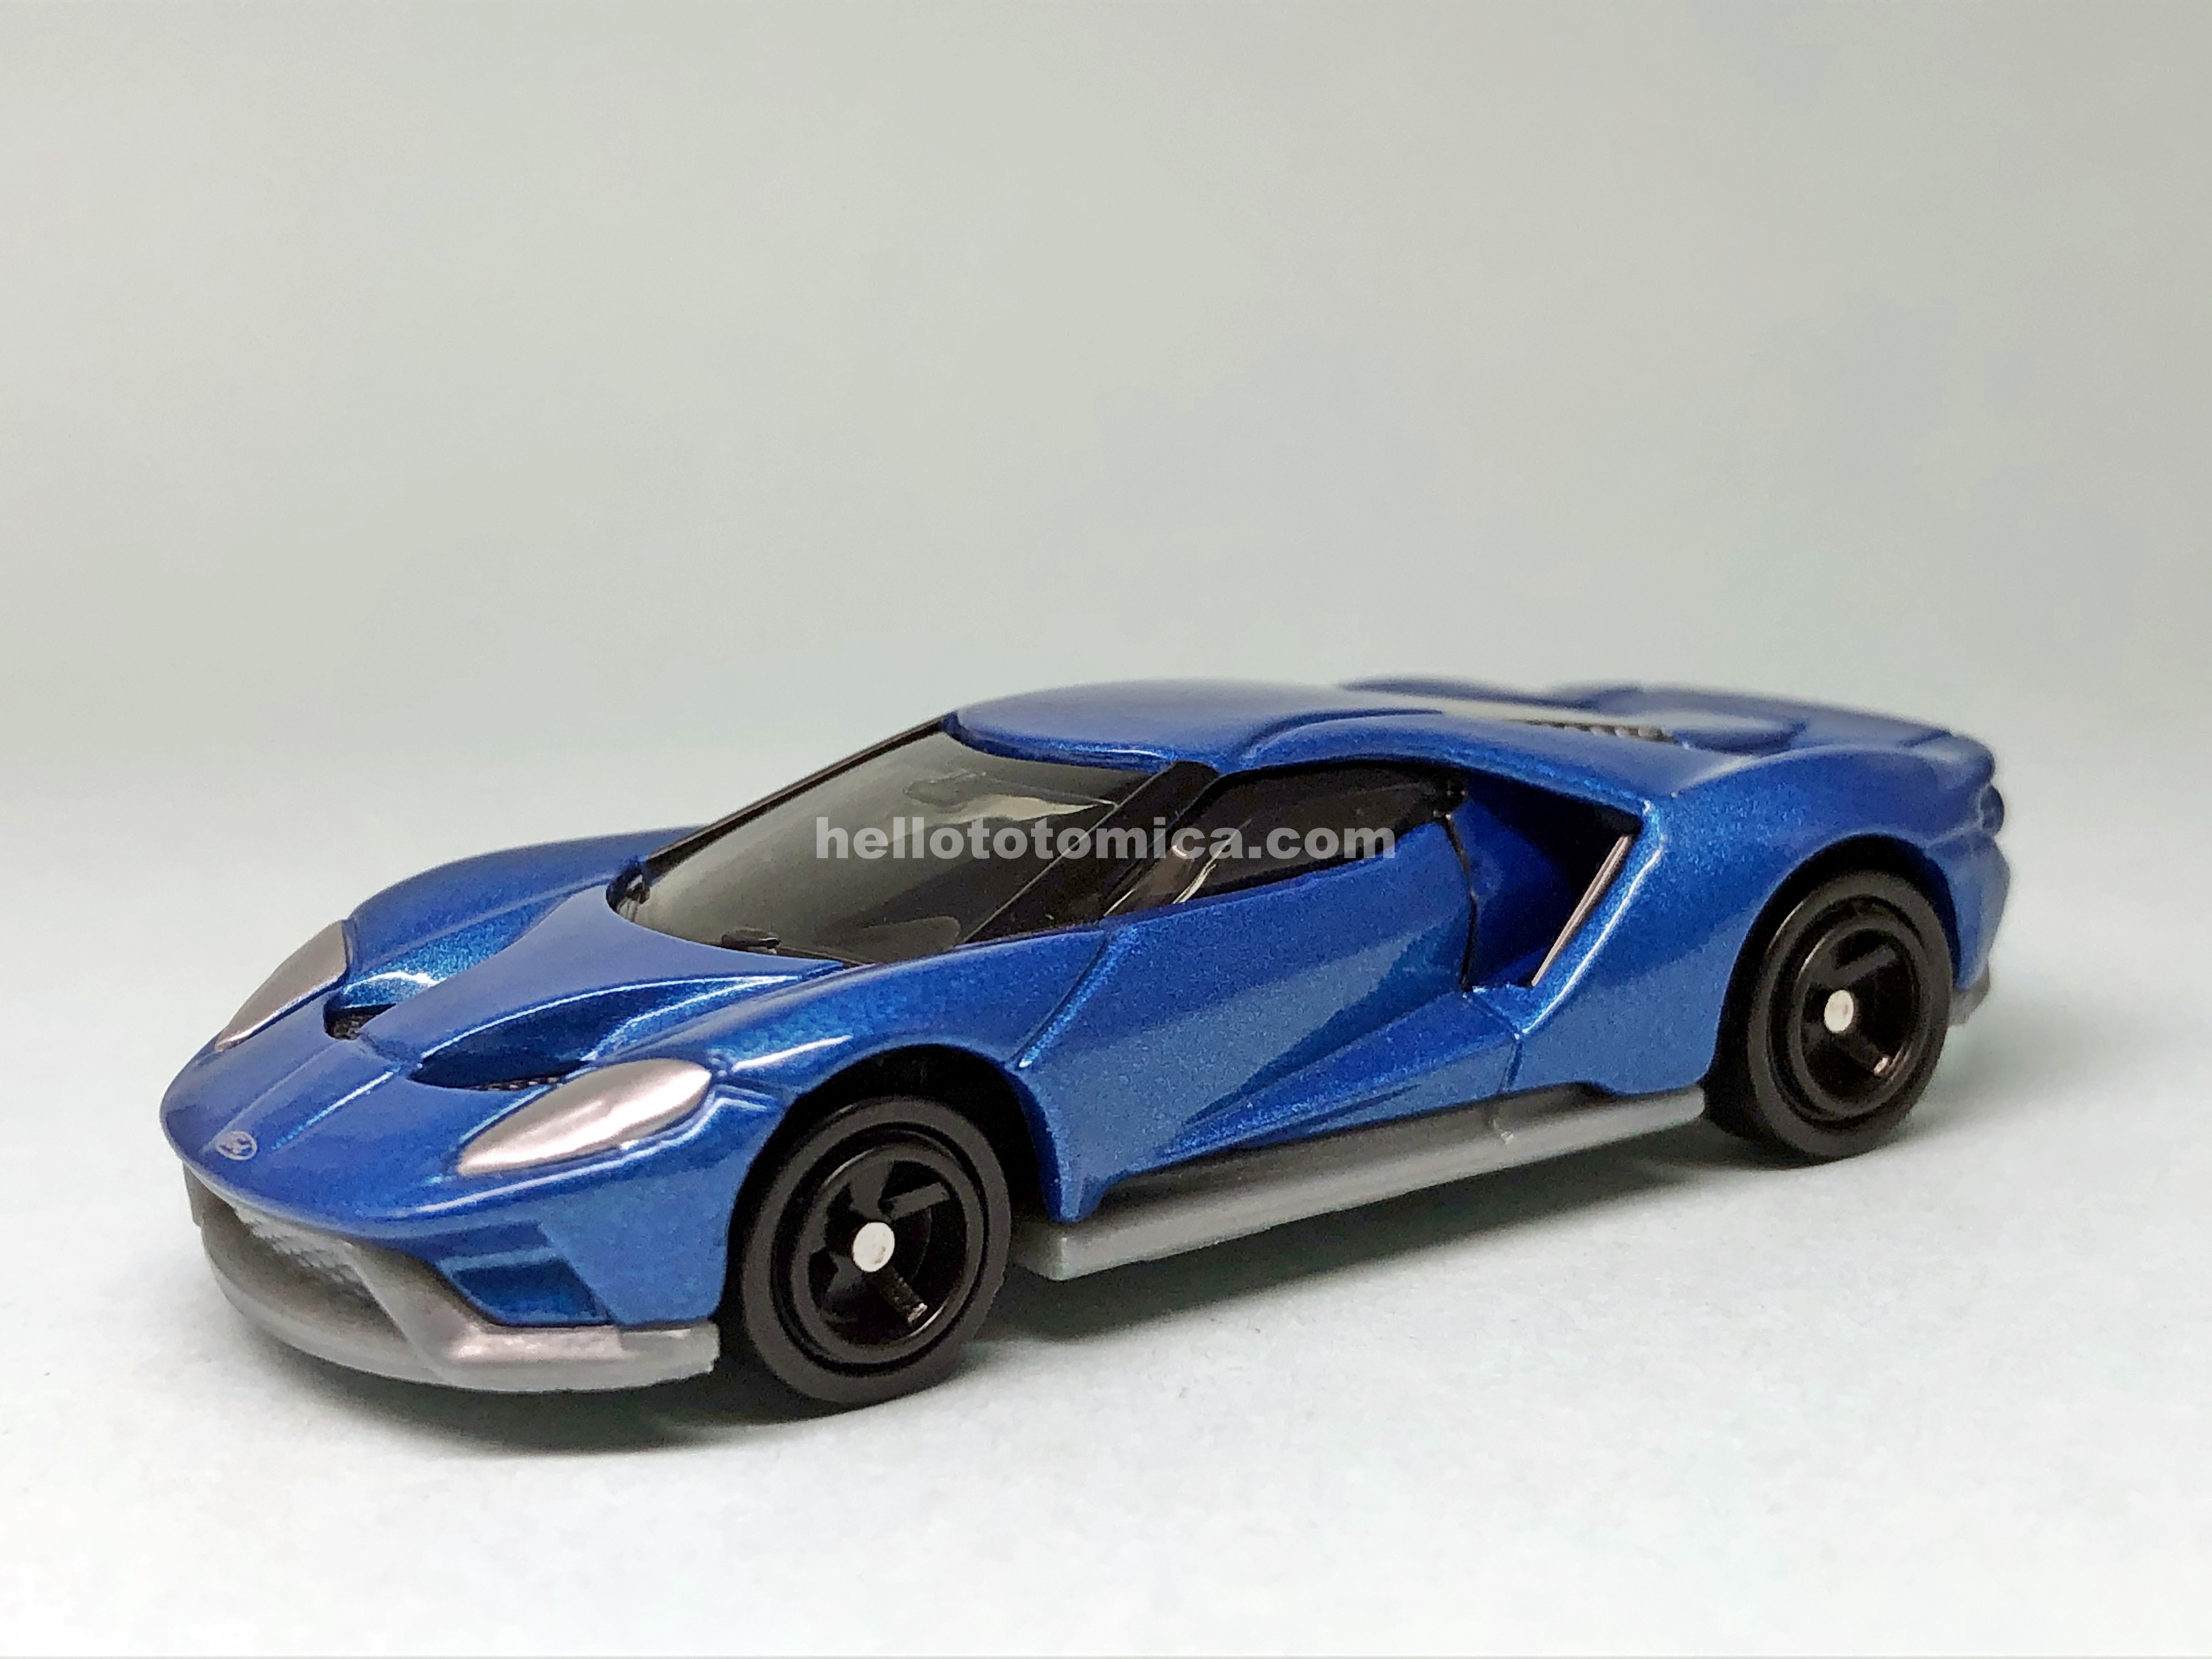 19-8 Ford GT Concept Car